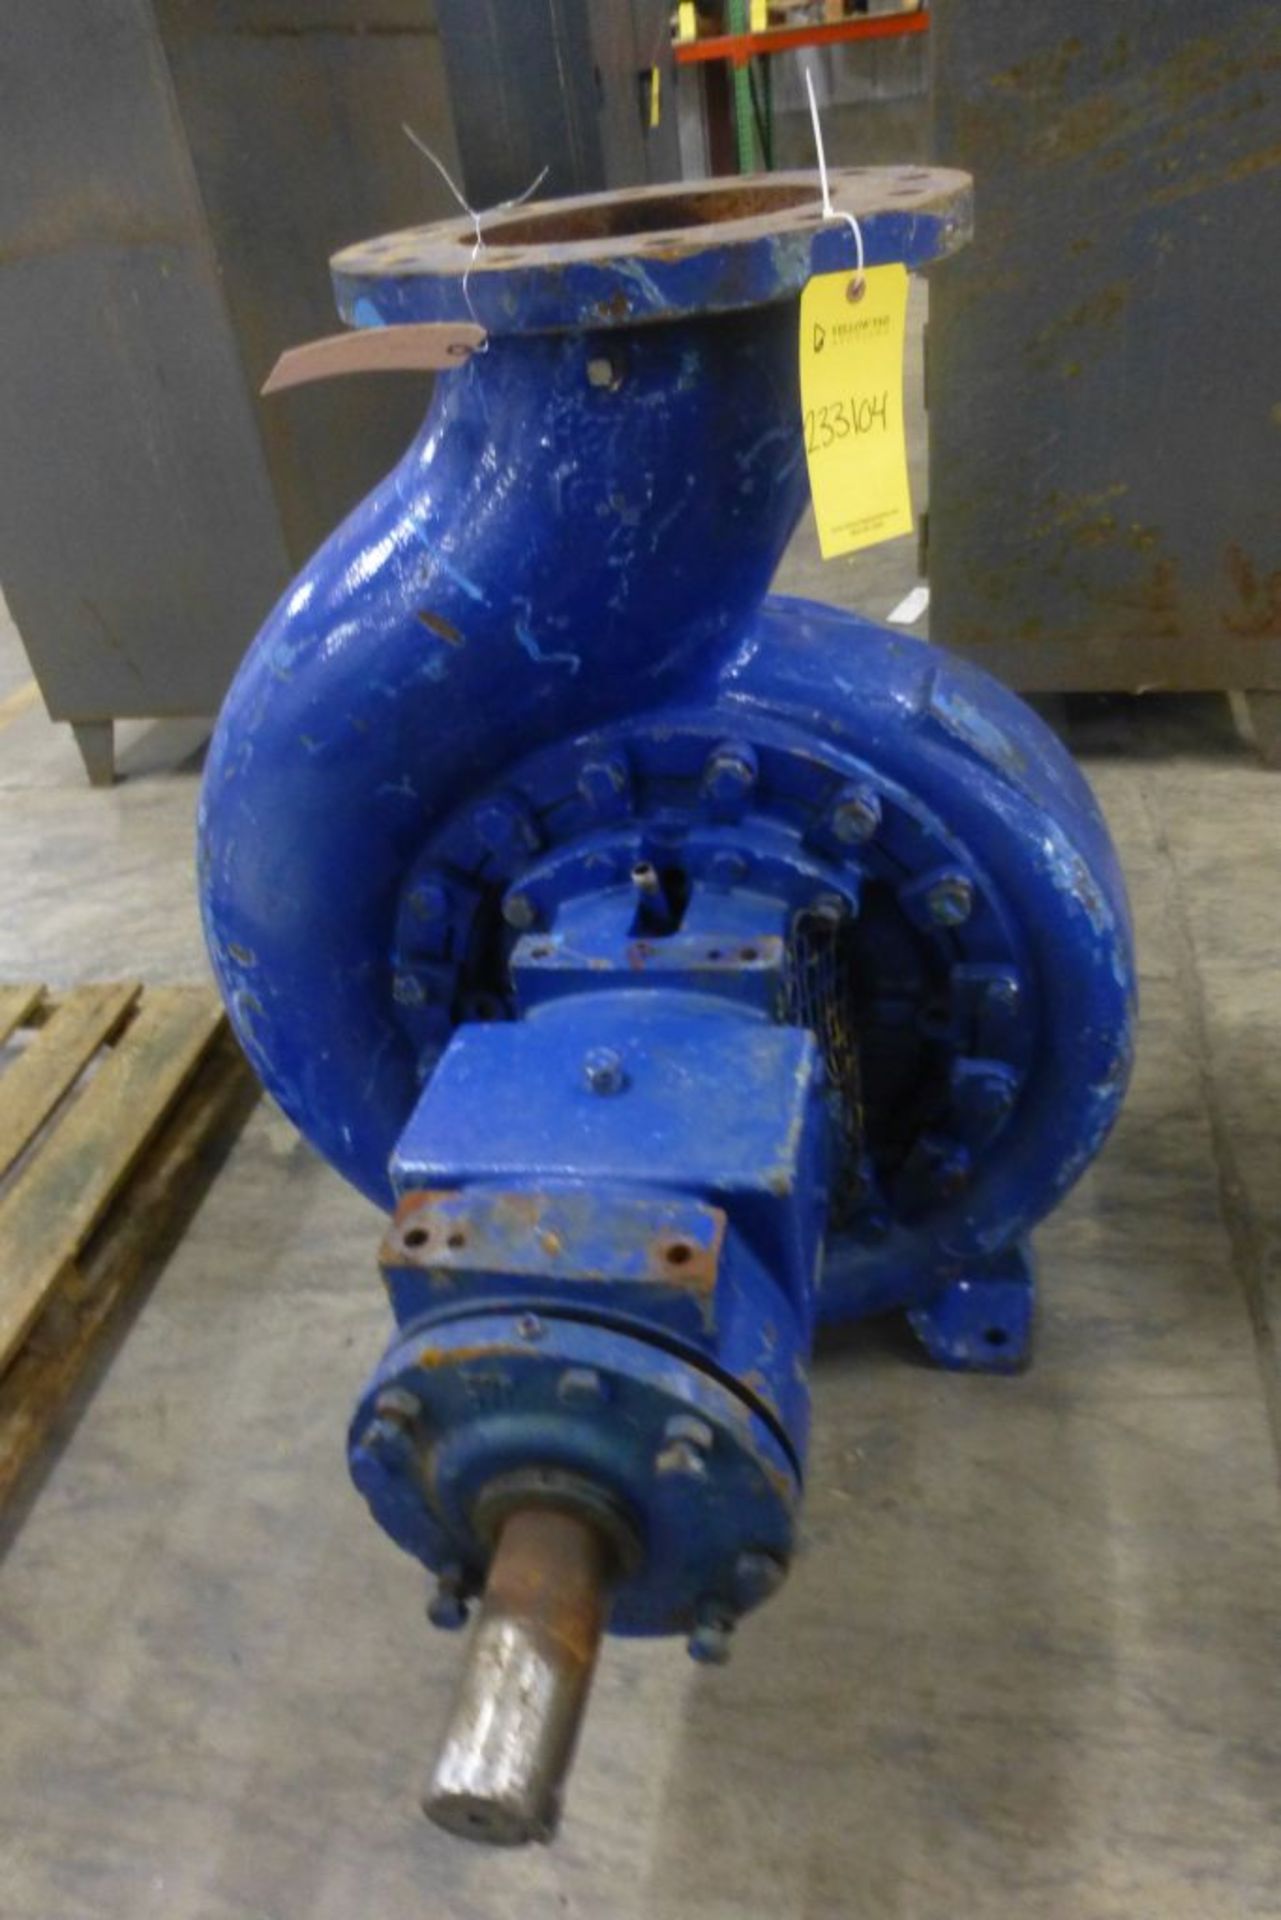 Goulds 10 x 12 3180 CI Valve | Tag: 233104 - Image 3 of 6